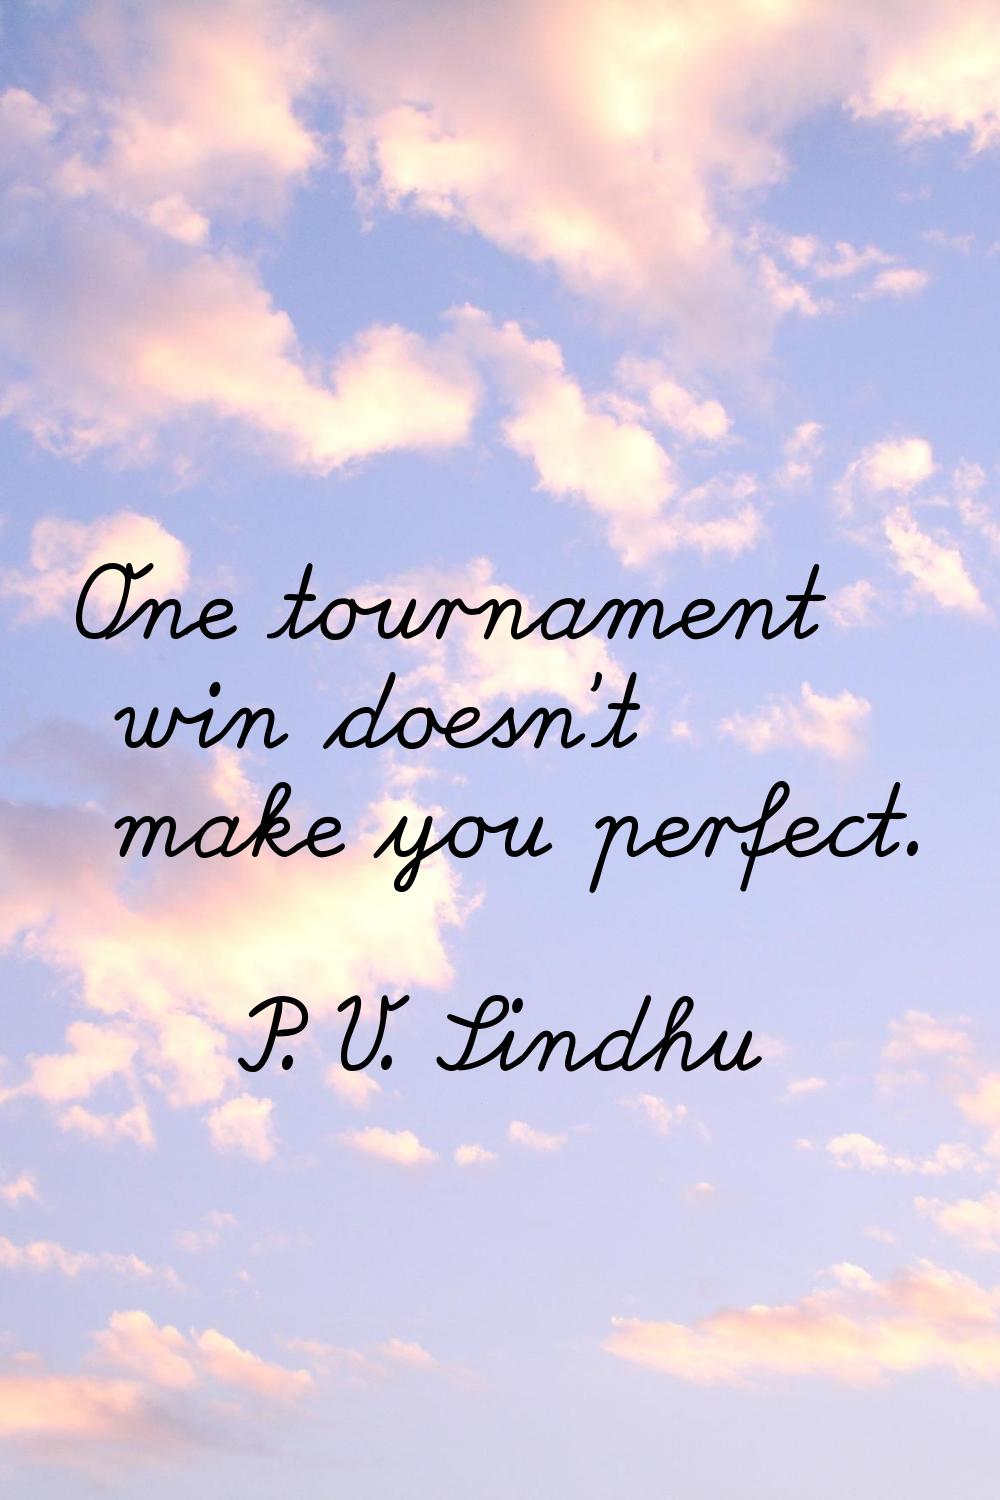 One tournament win doesn't make you perfect.